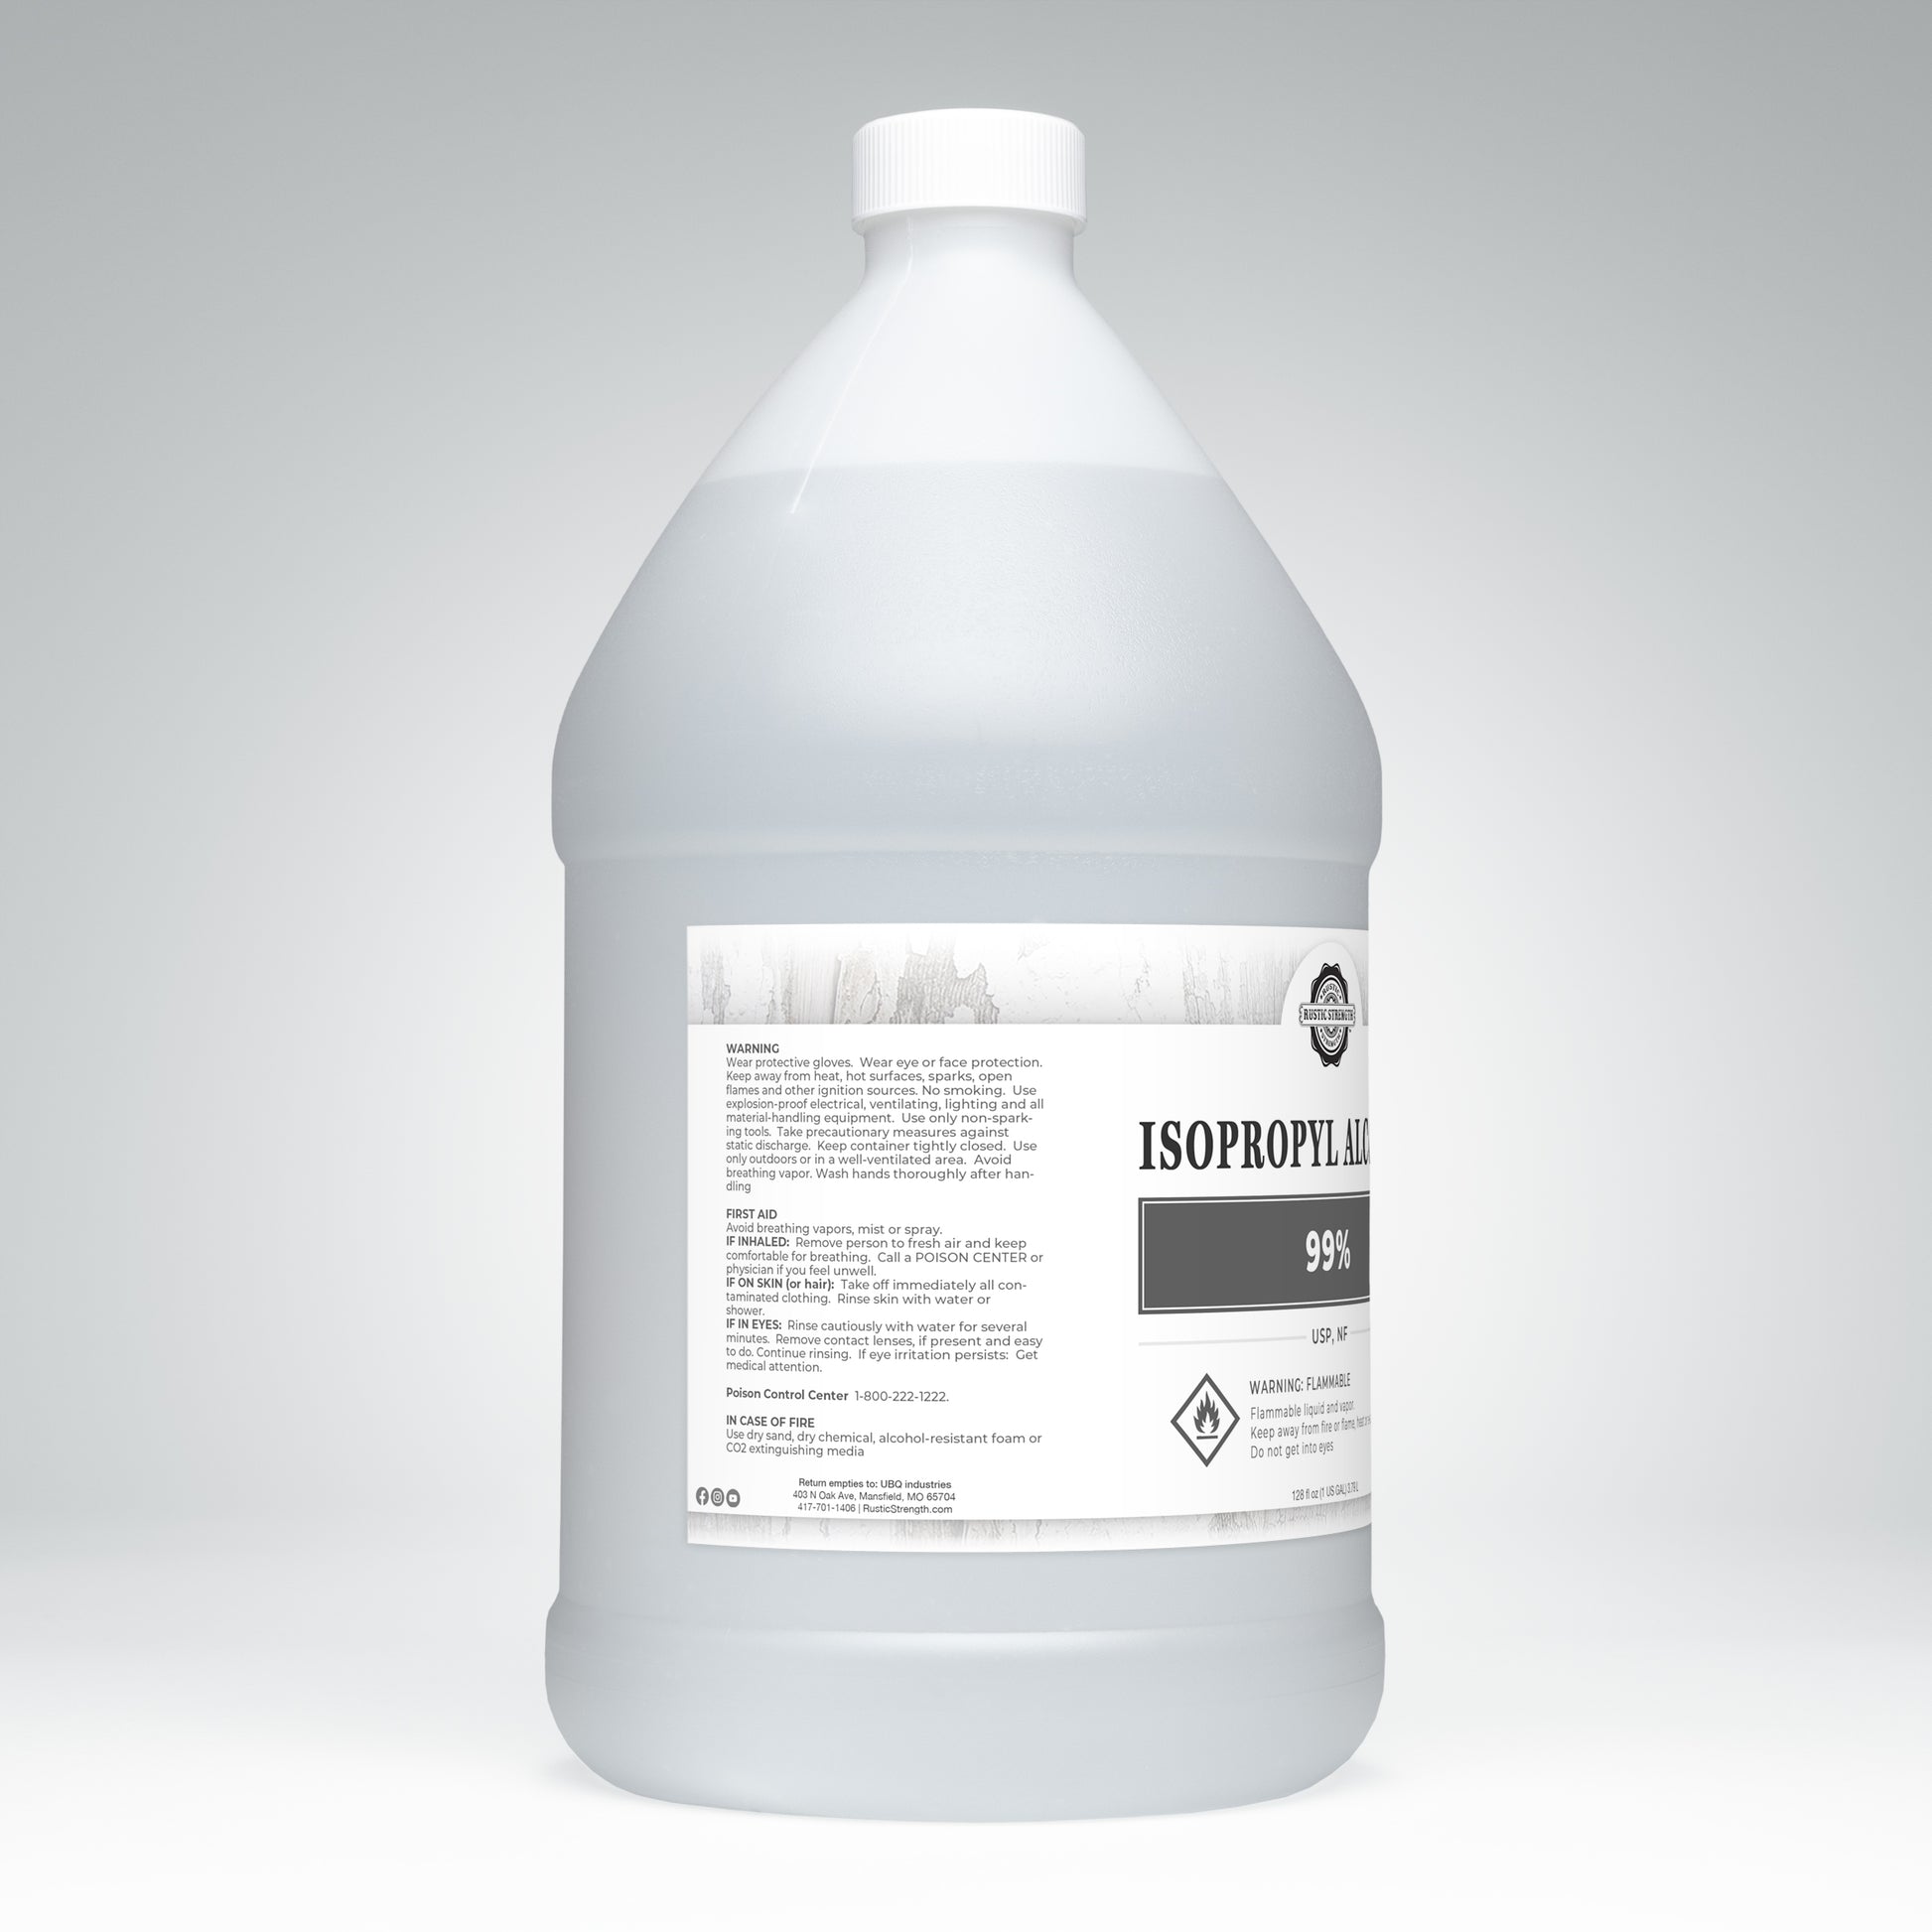 Isopropyl Alcohol (IPA) – Best Chemical Co (S) Pte Ltd